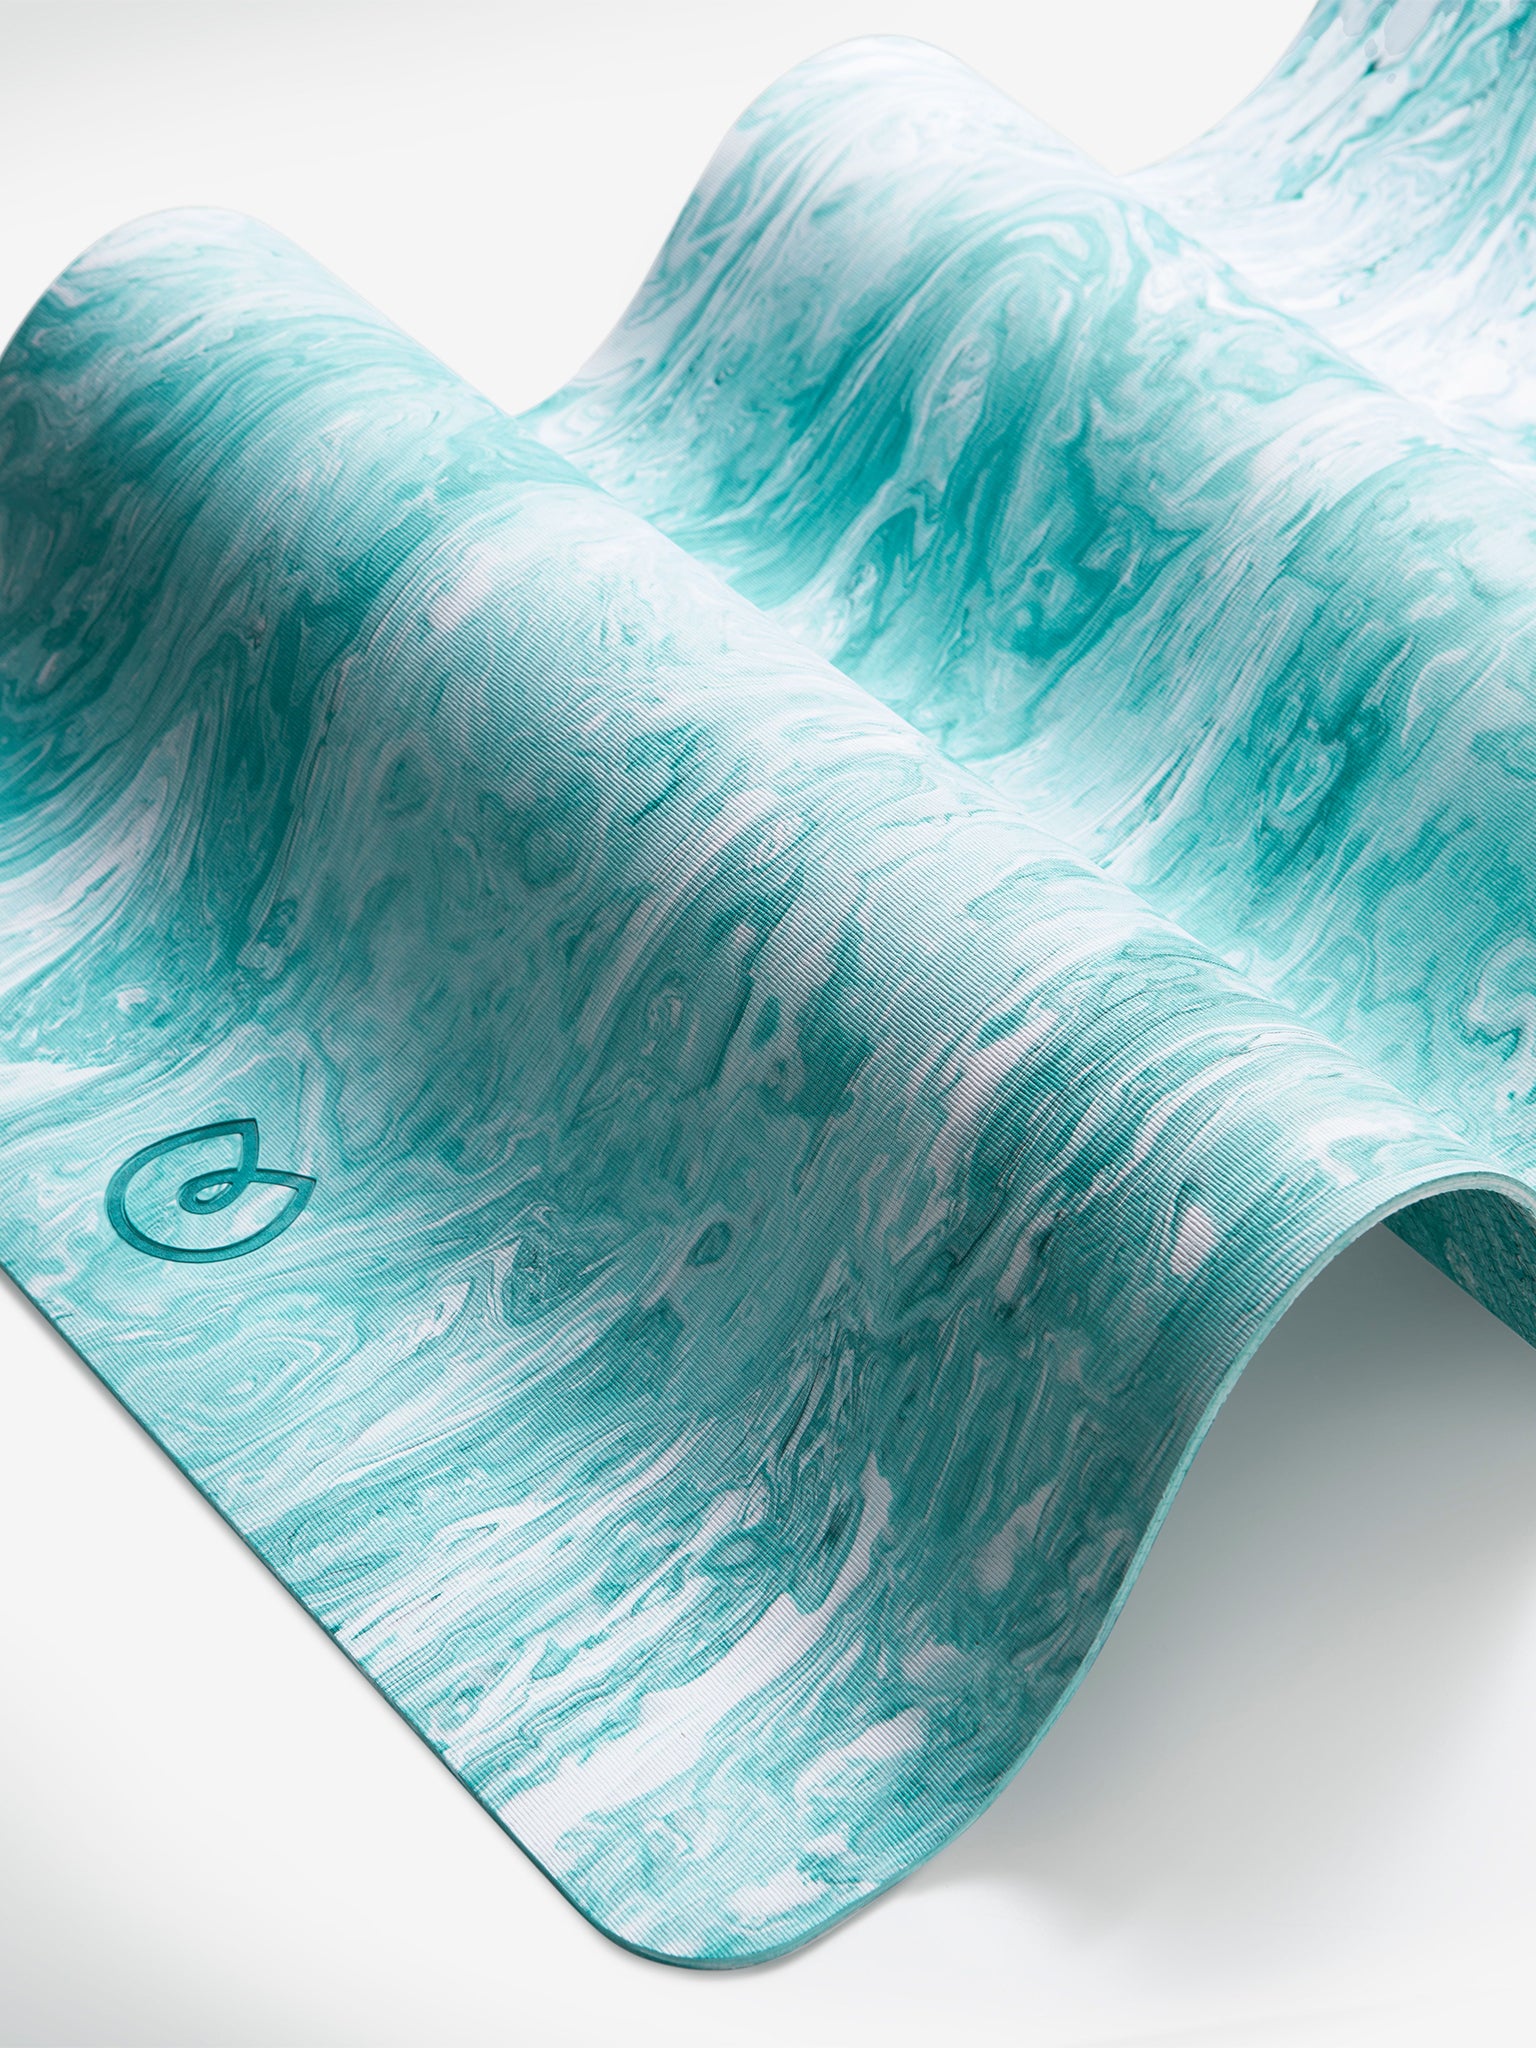 Close-up side shot of a turquoise marbled yoga mat with a visible logo, textured anti-slip surface, premium fitness and exercise accessory.